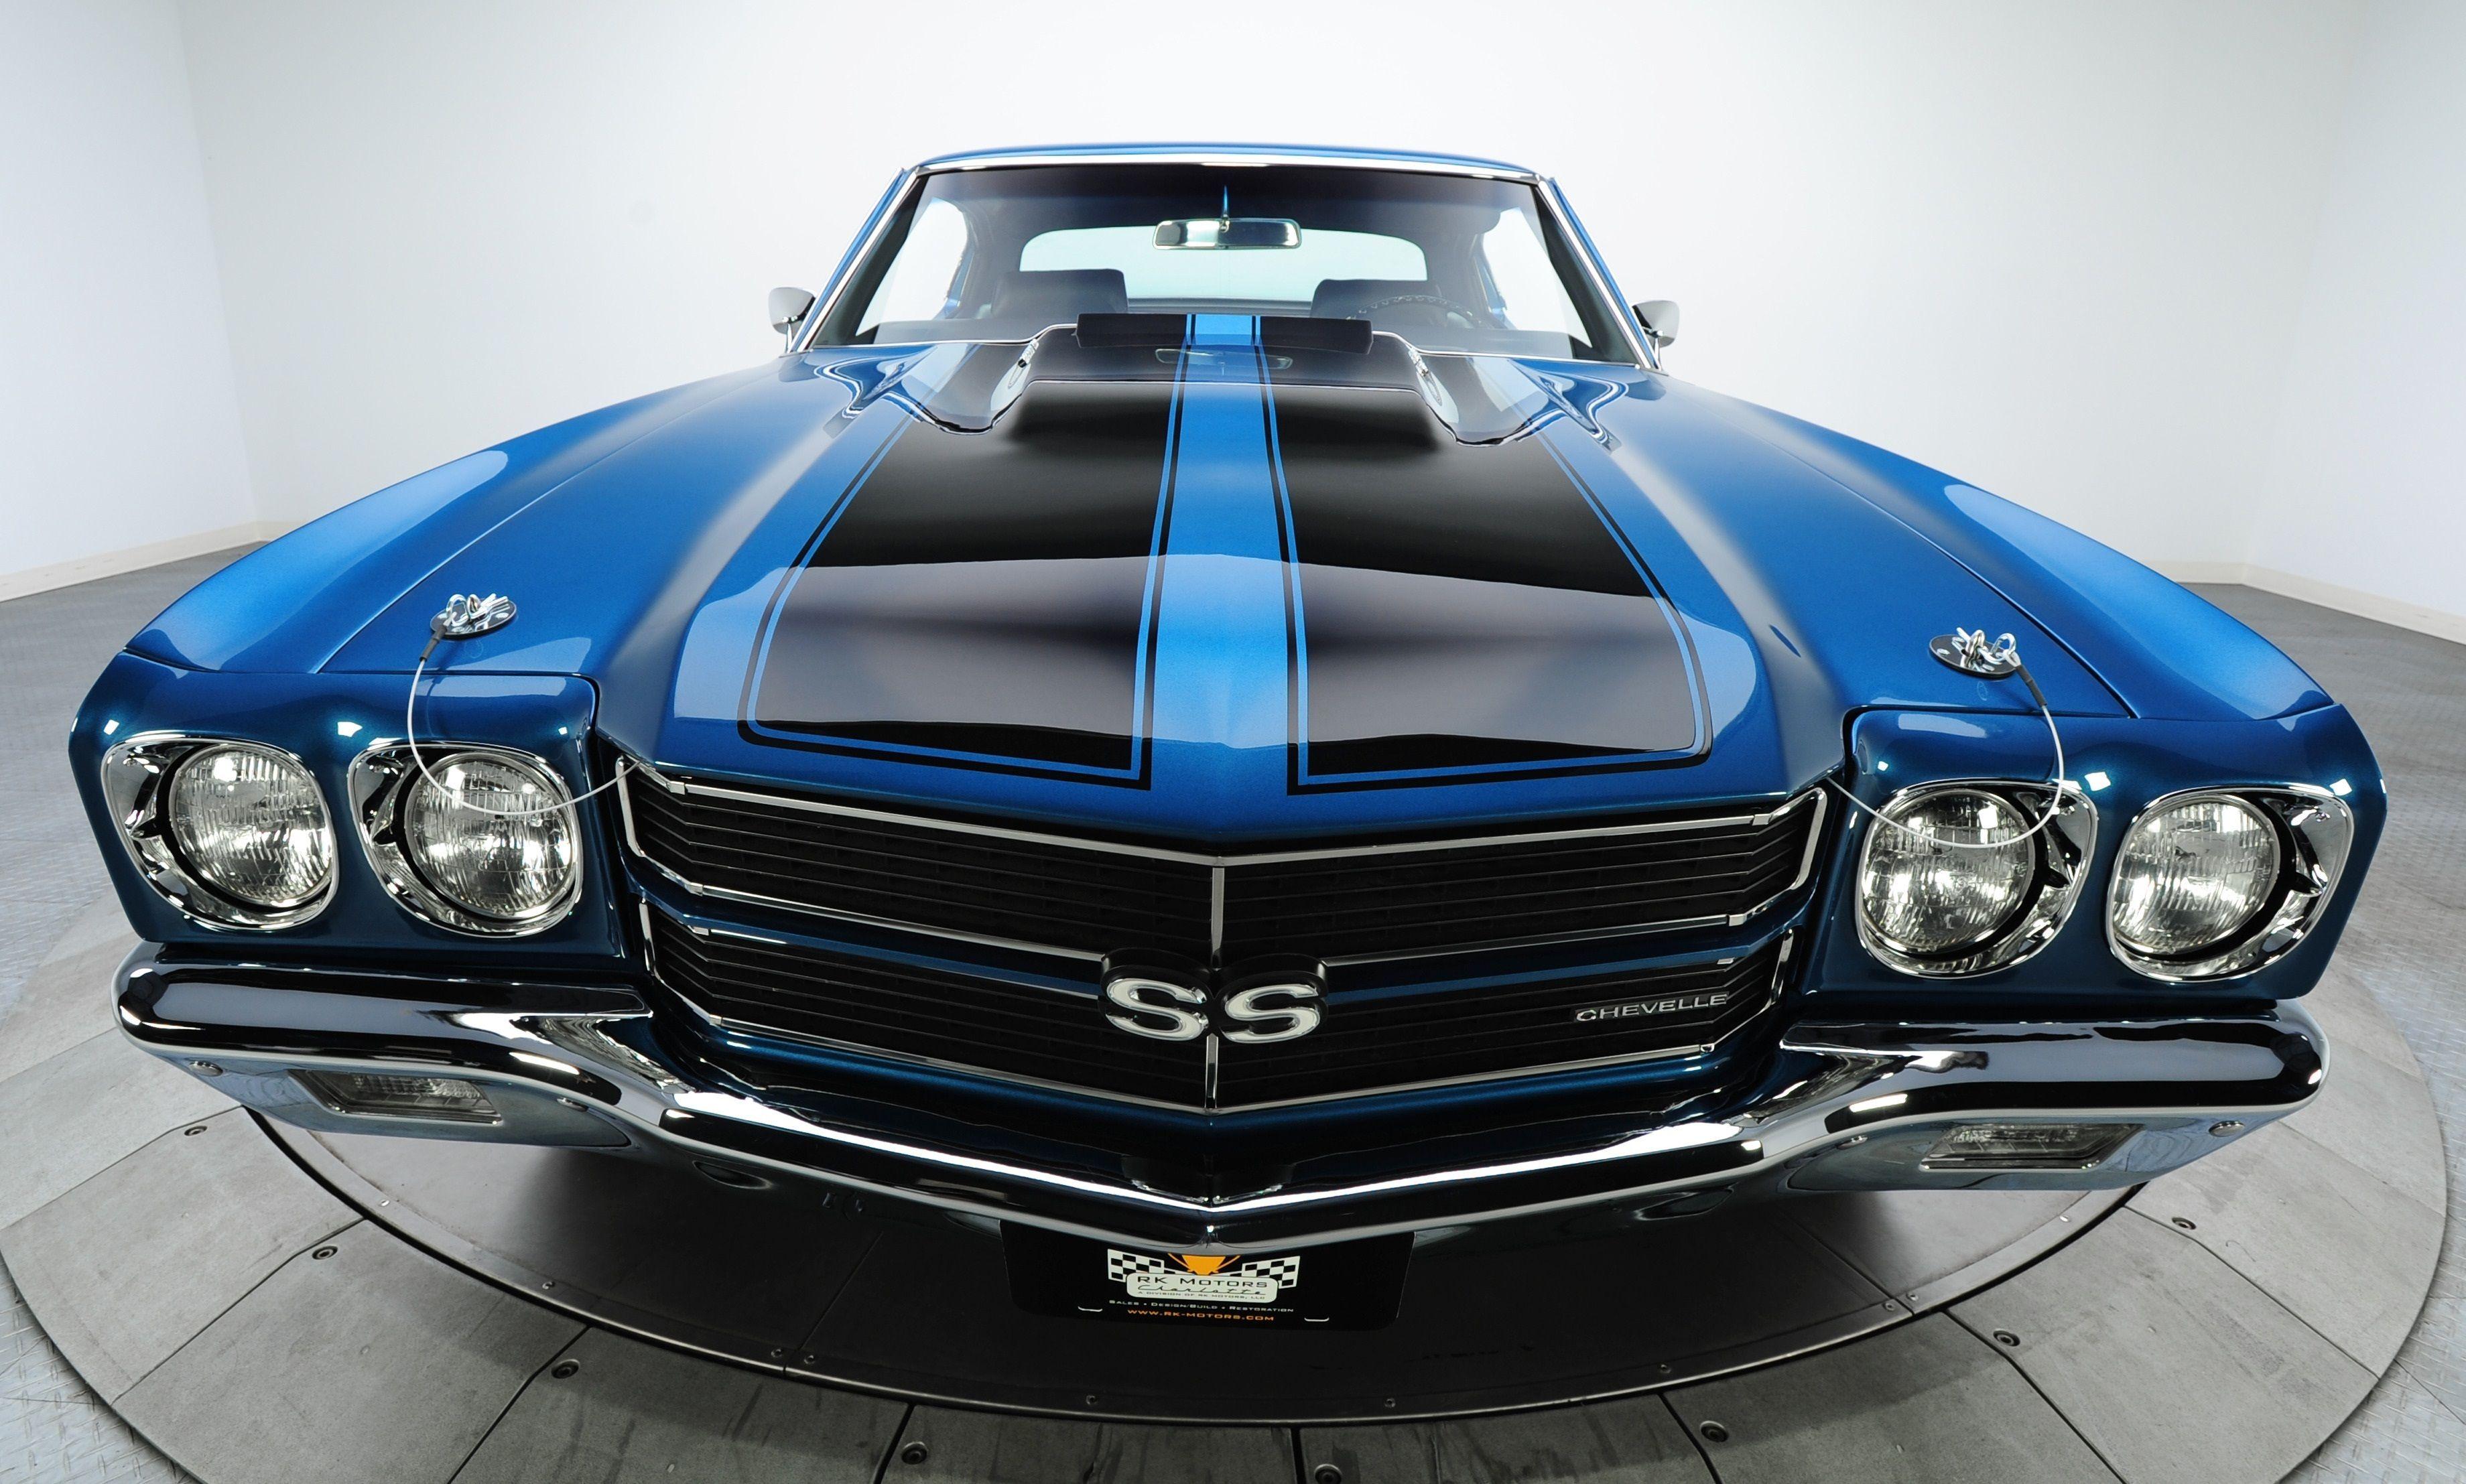 Muscle Car HD Wallpaper and Background Image